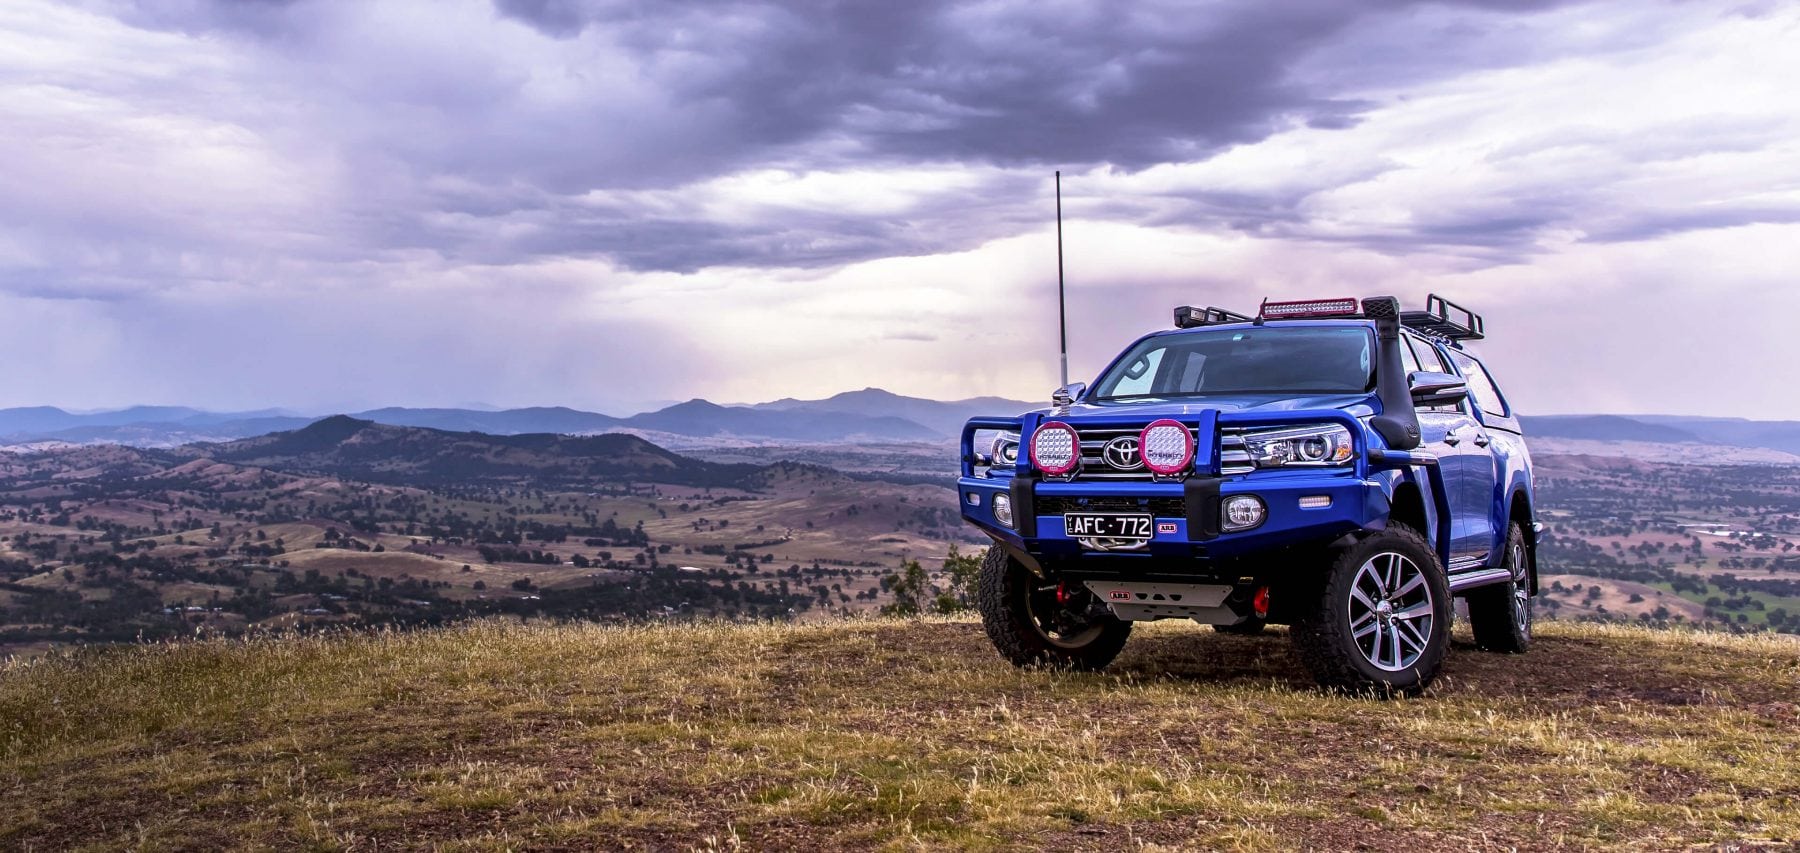 Four Wheel Drive Bull Bars: The Top Features You Should Look Out For